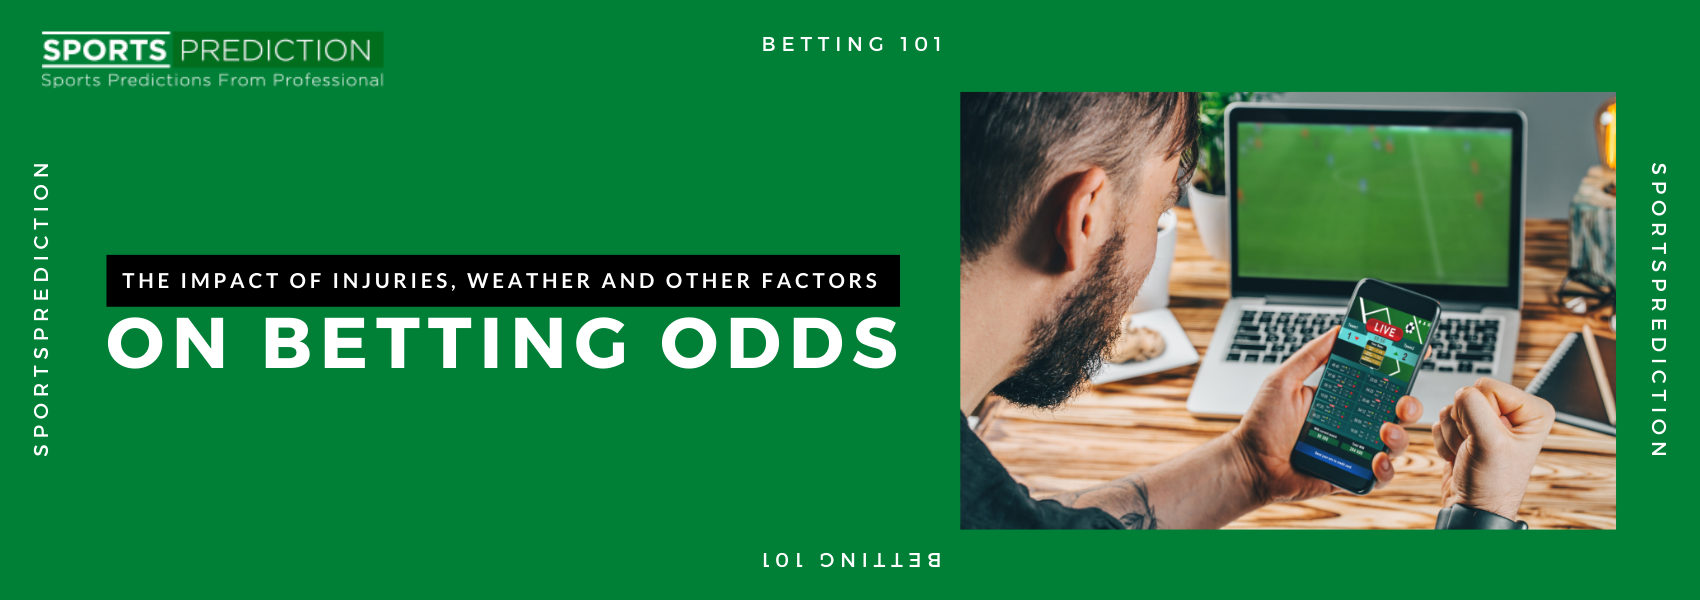 The Impact Of Injuries, Weather And Other Factors On Betting Odds